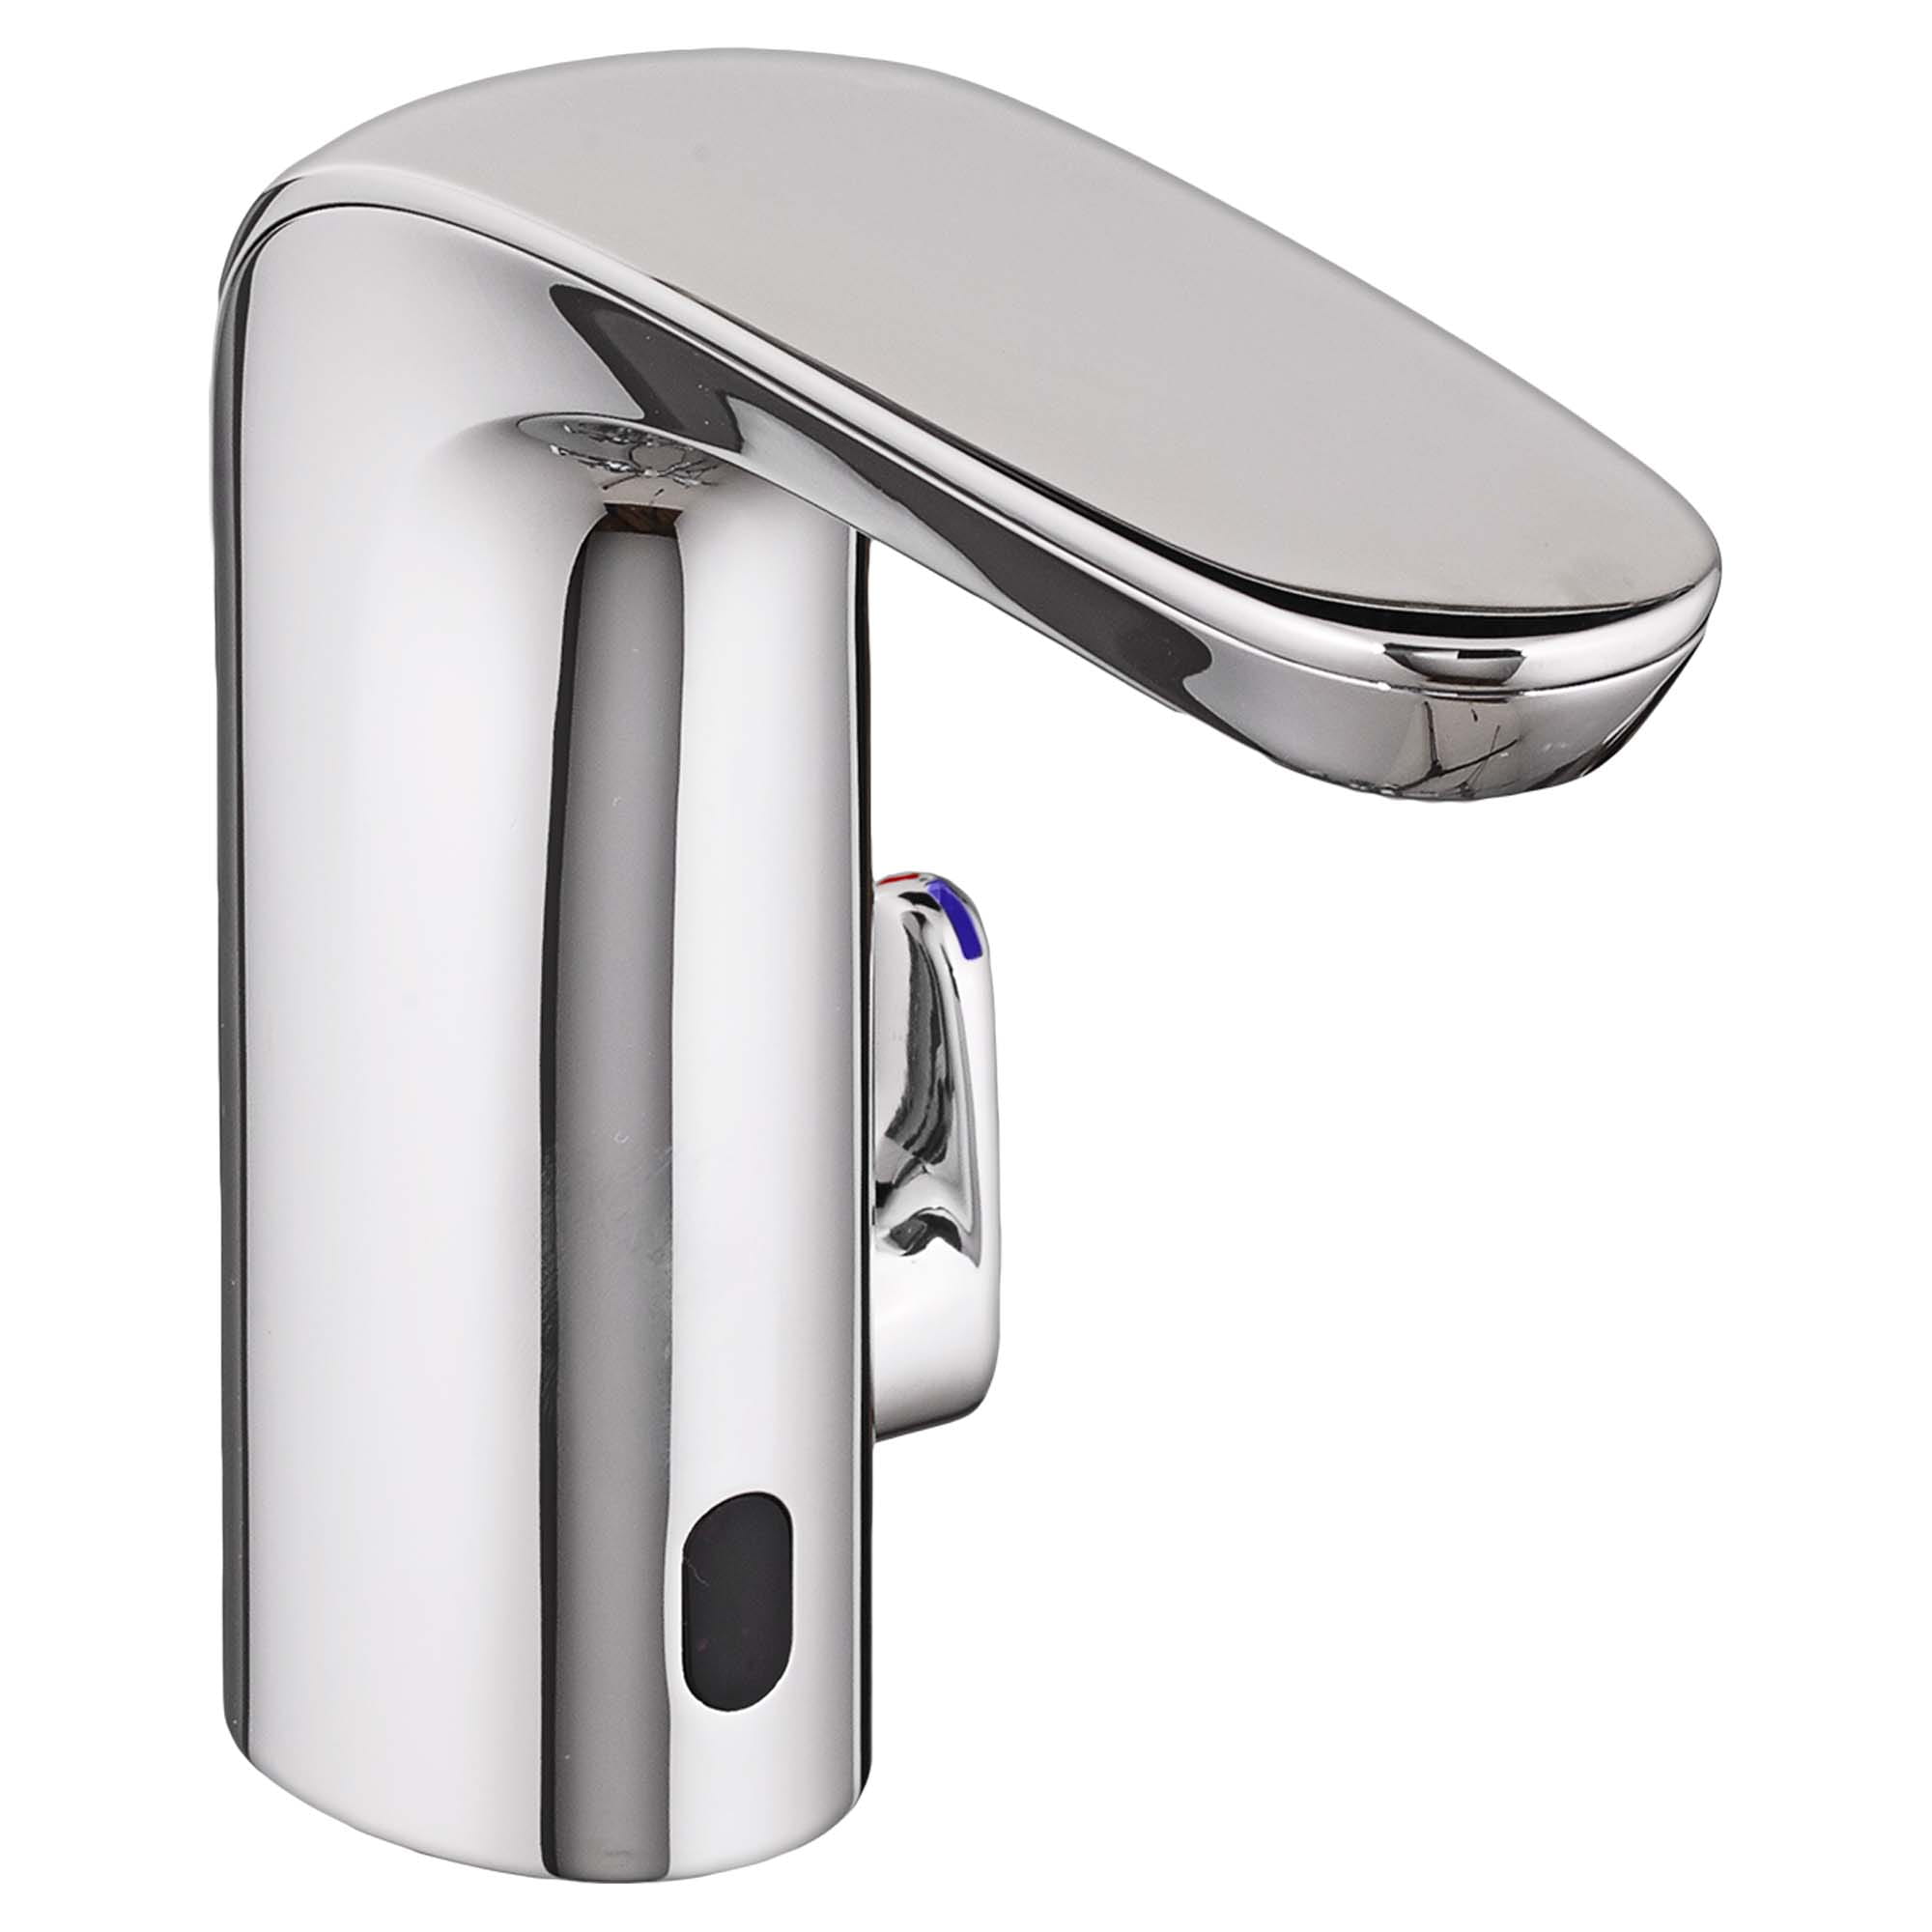 NextGen™ Selectronic® Touchless Faucet, Battery-Powered With Above-Deck Mixing, 1.5 gpm/5.7 Lpm